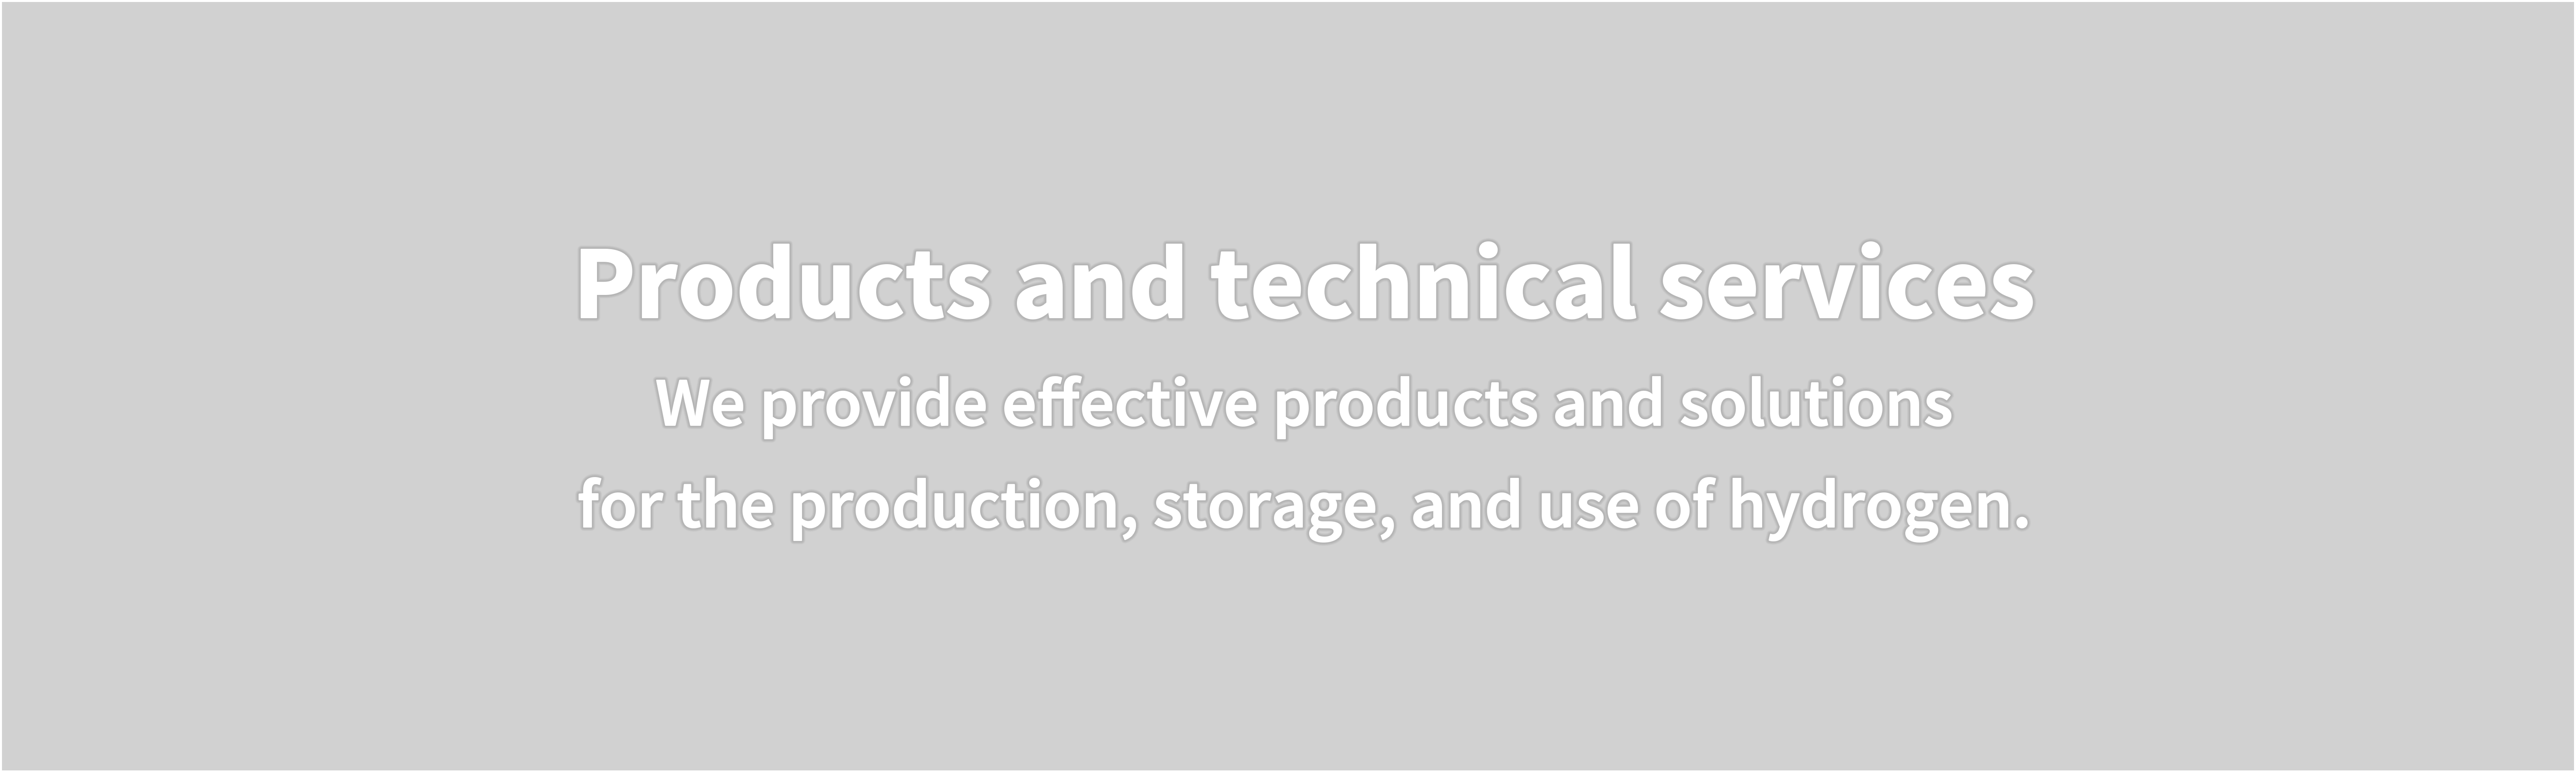 Products and technical services  We provide effective products and solutions  for the production, storage, and use of hydrogen.